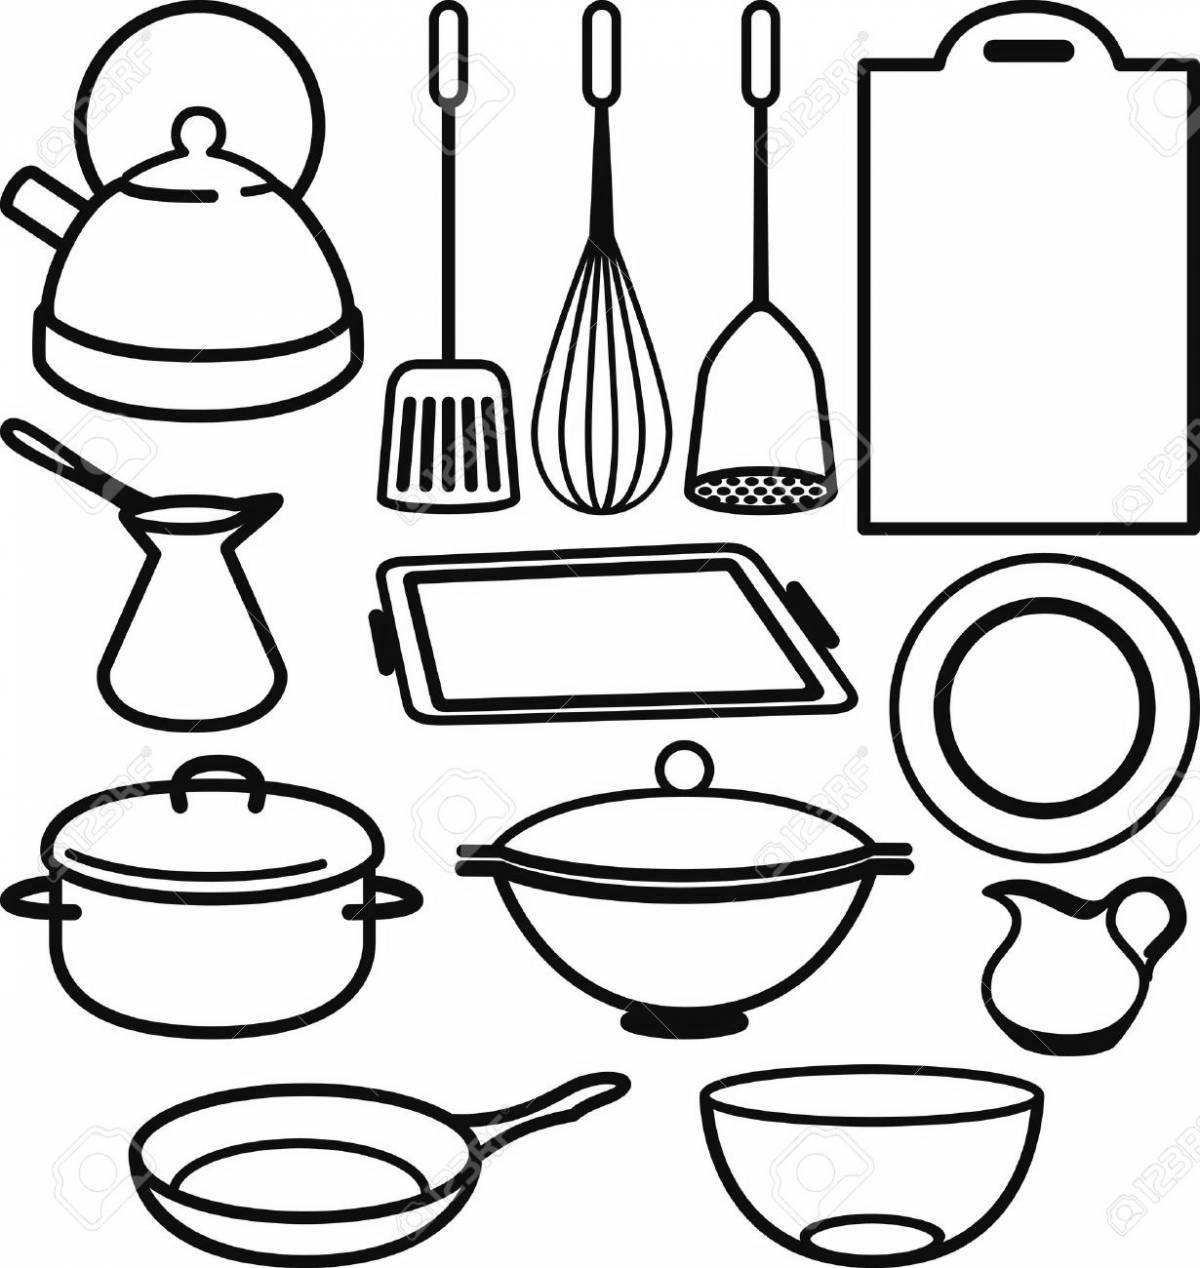 Coloring page adorable cooking tools